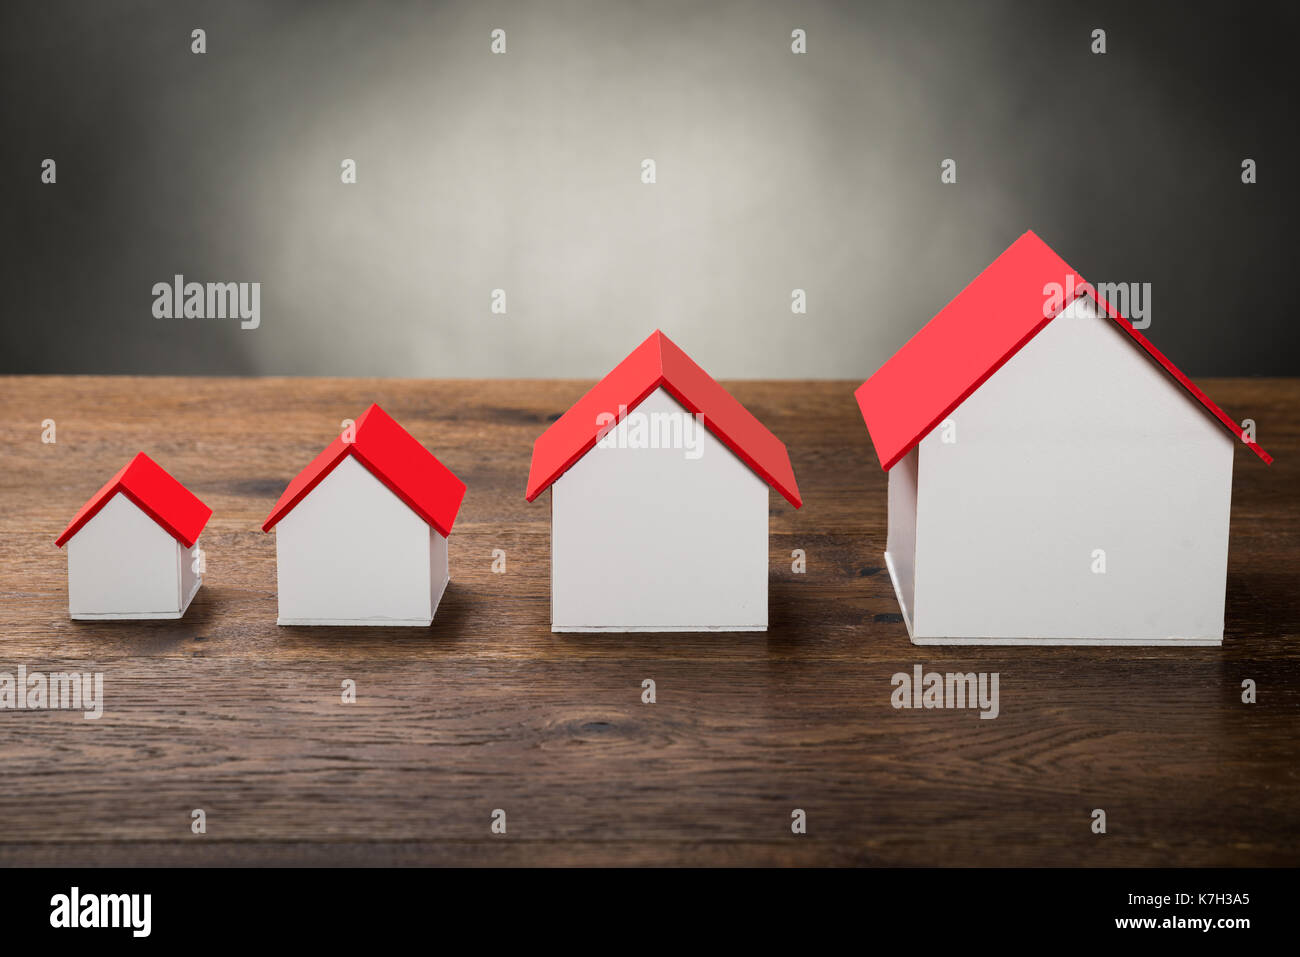 Different Size Houses In Row On Wooden Table Stock Photo